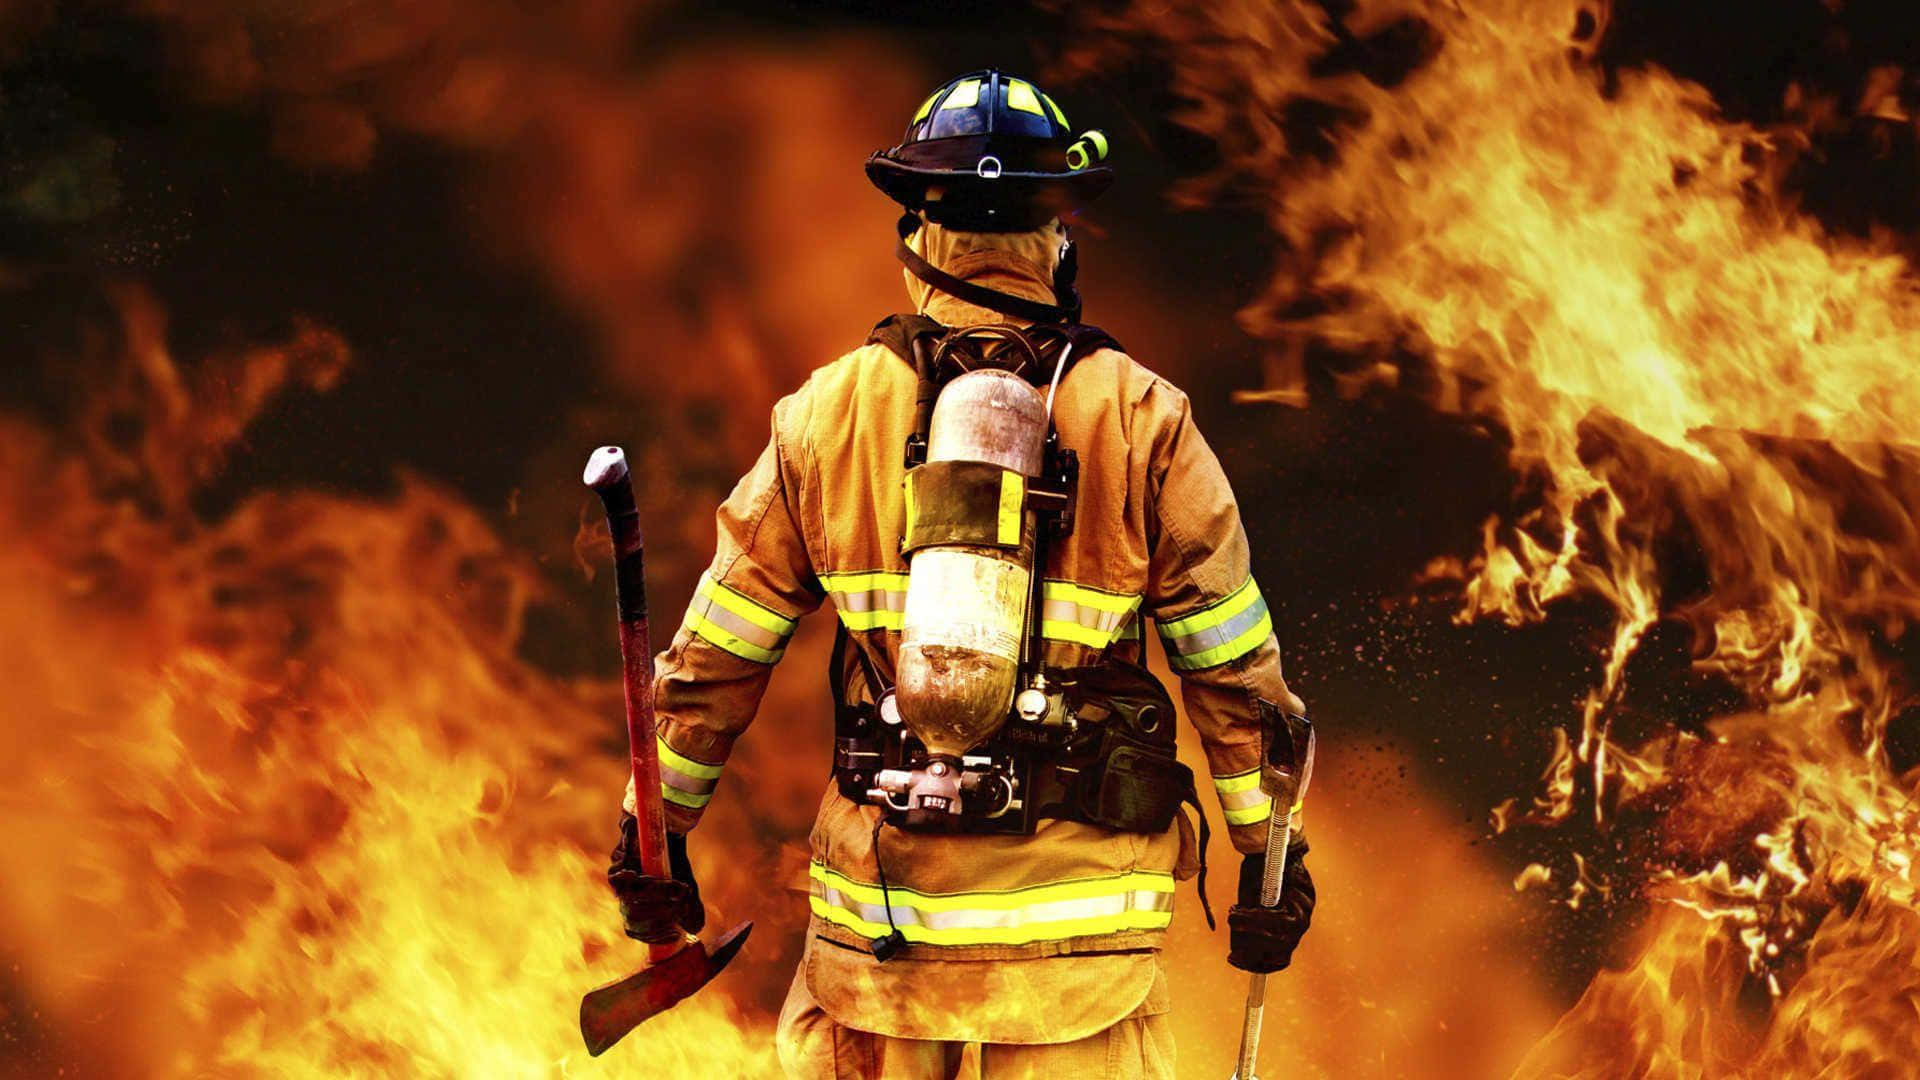 A Firefighter stands in front of a blazing fire